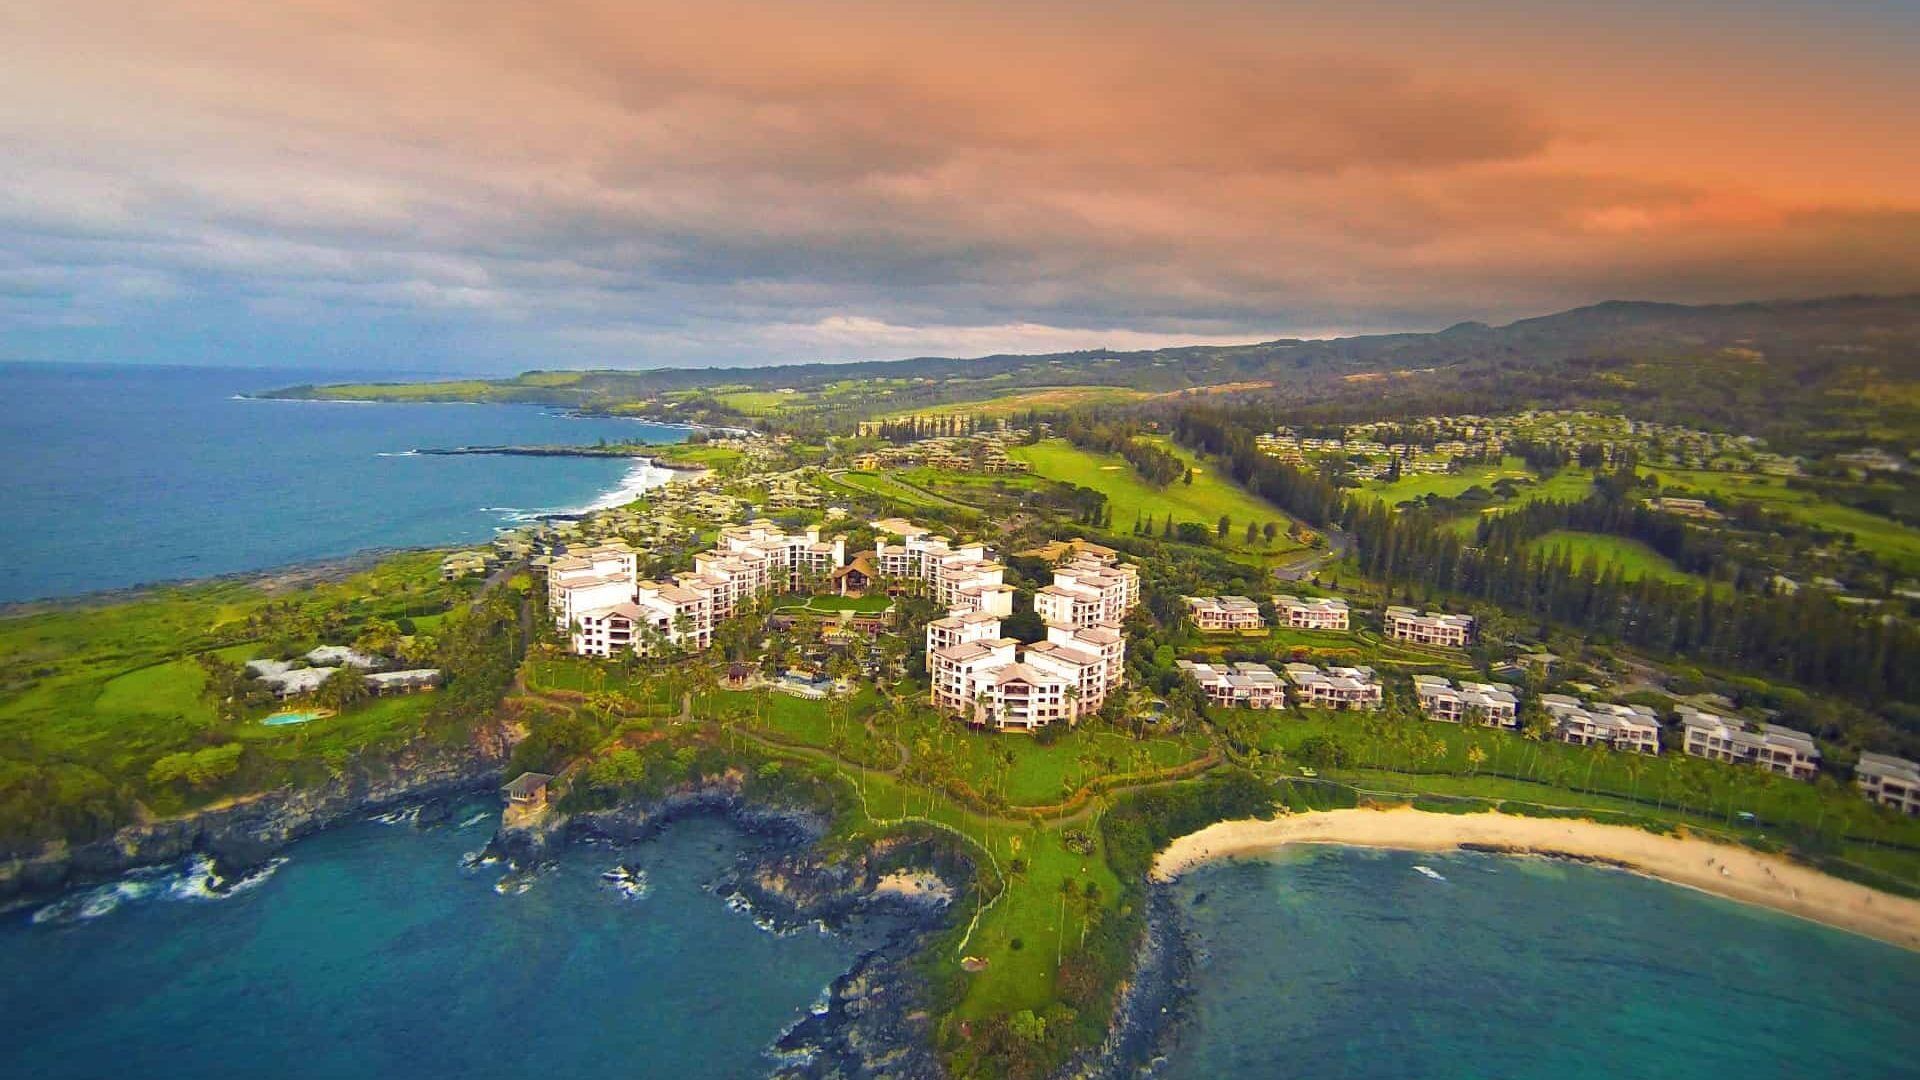 Fabulous Maui resorts: top 9 places to stay in Hawaii